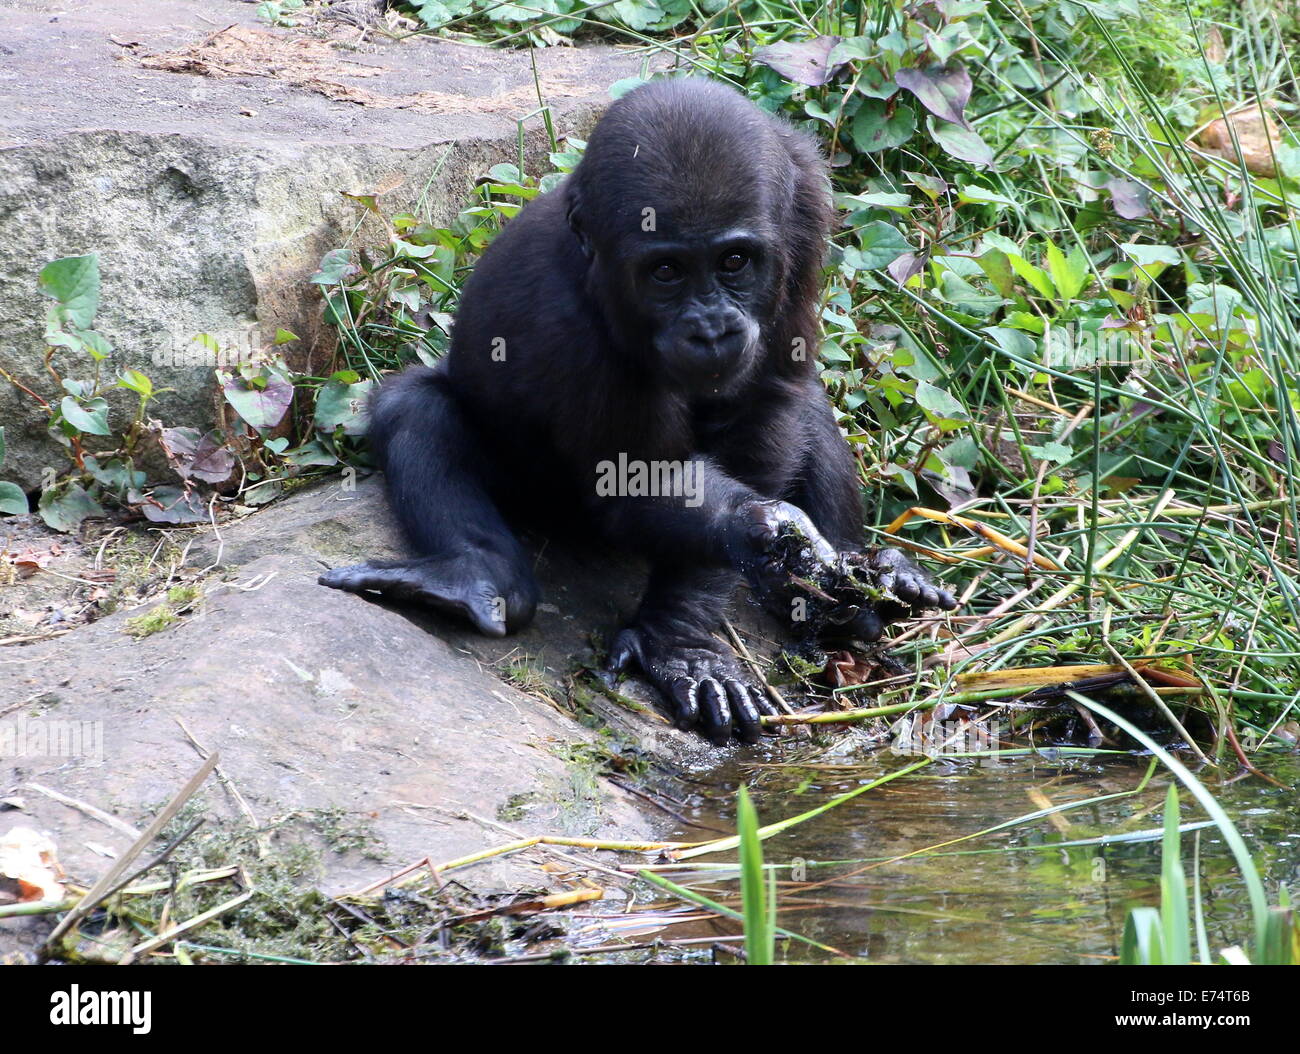 Young  Gorilla drinking water at a pond Stock Photo